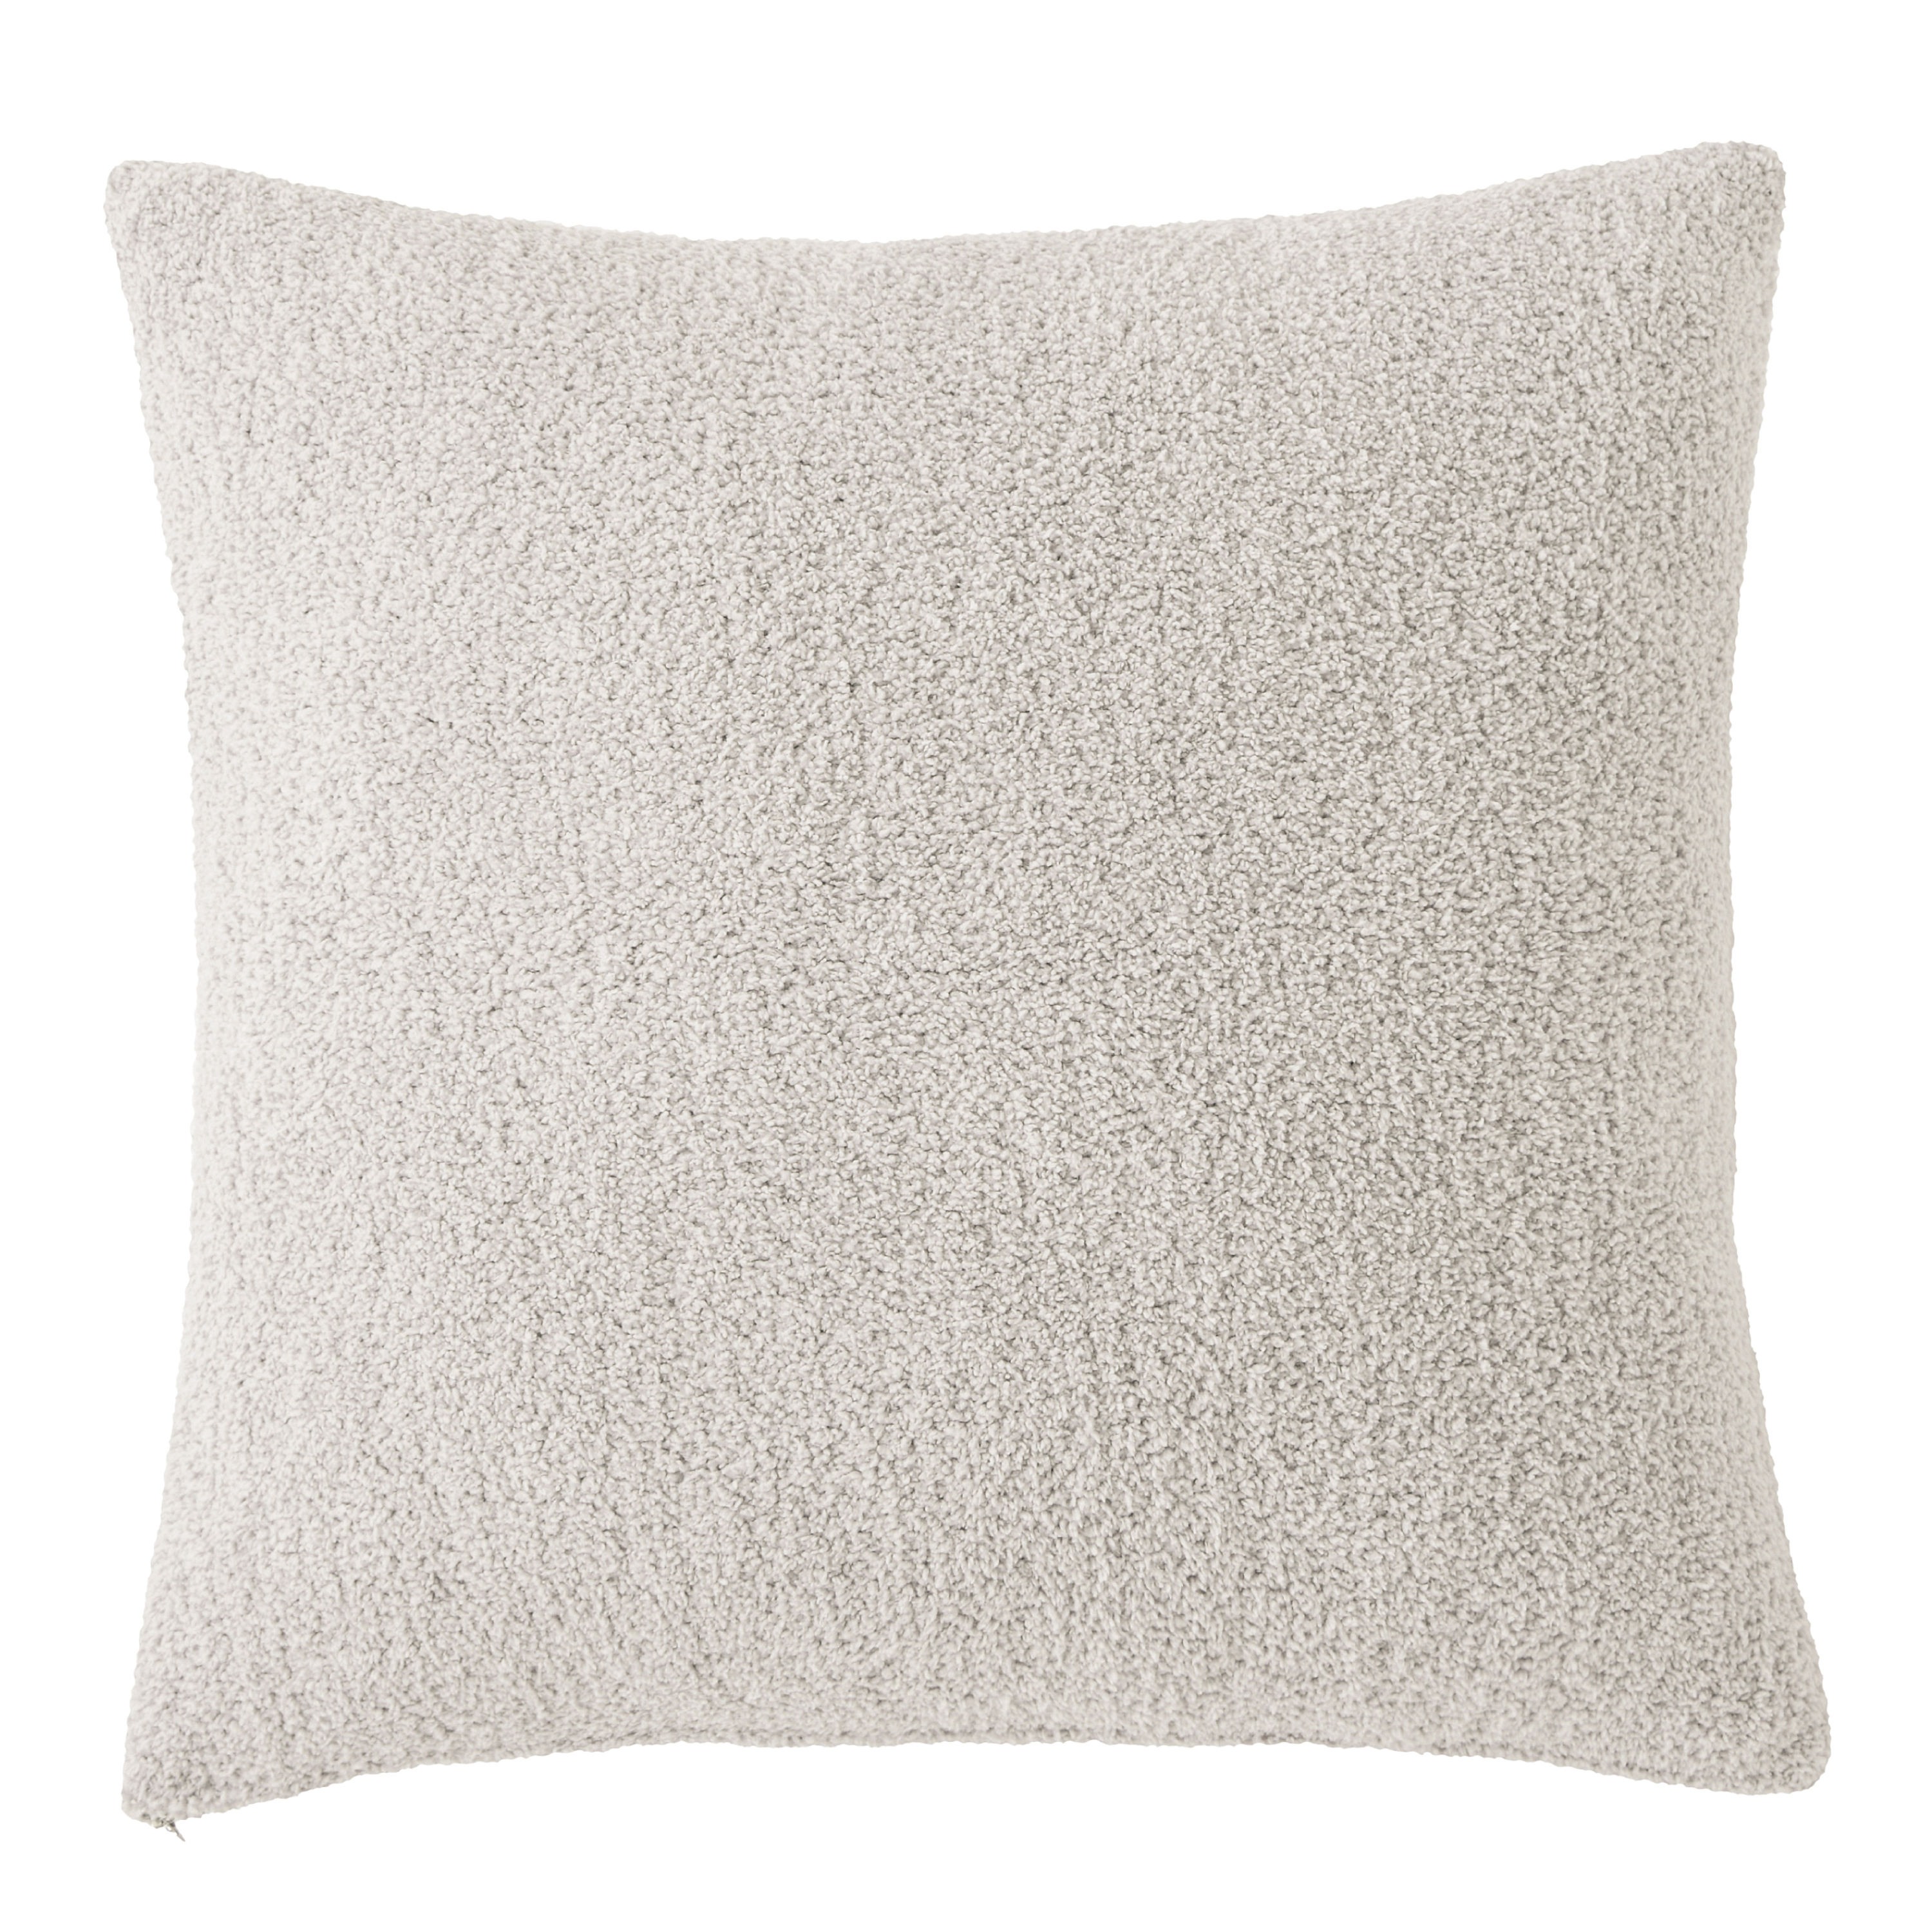 BIG CUSHION COVER / SOLID